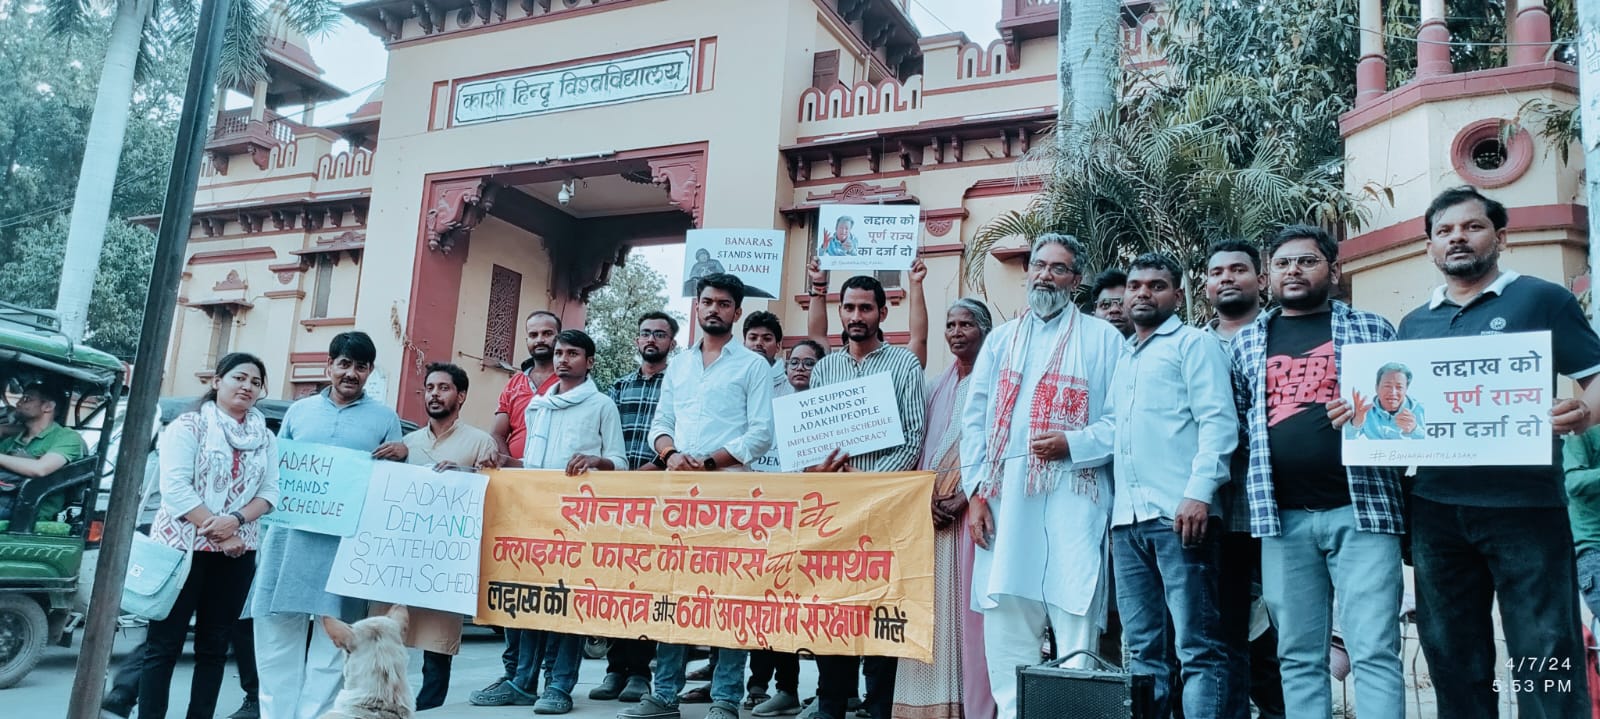 People gathered at BHU Gate in support of the ongoing struggle in Ladakh led by Sonam Wangchuk